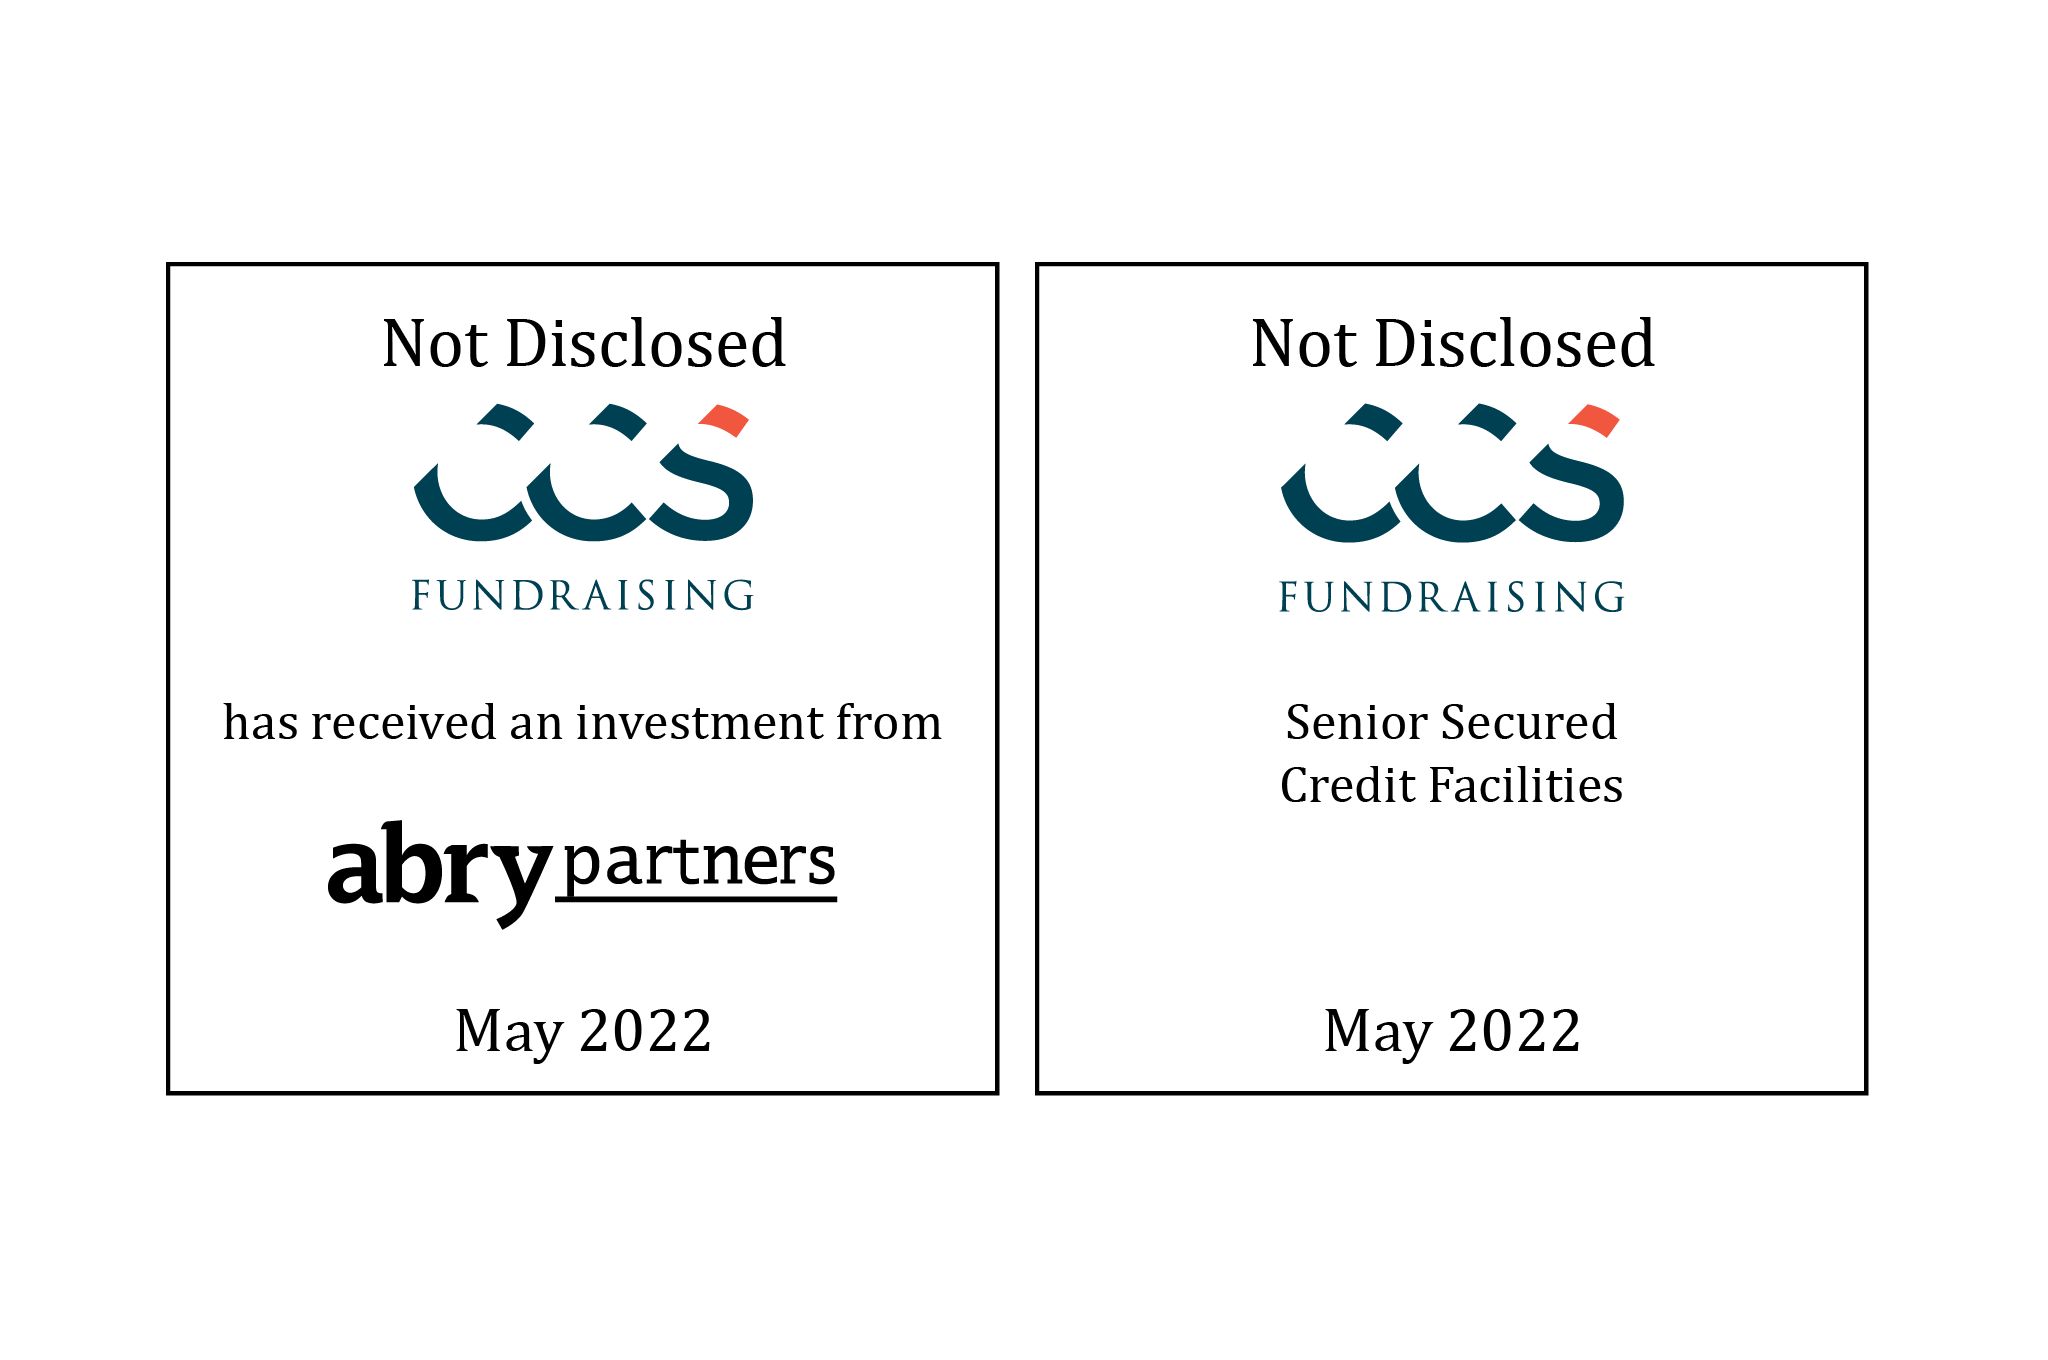 Two tombstones: CCS Fundraising (logo) has received an investment from Abry Partners (logo); and CCS Fundraising (logo) Senior Secured Credit Facilities